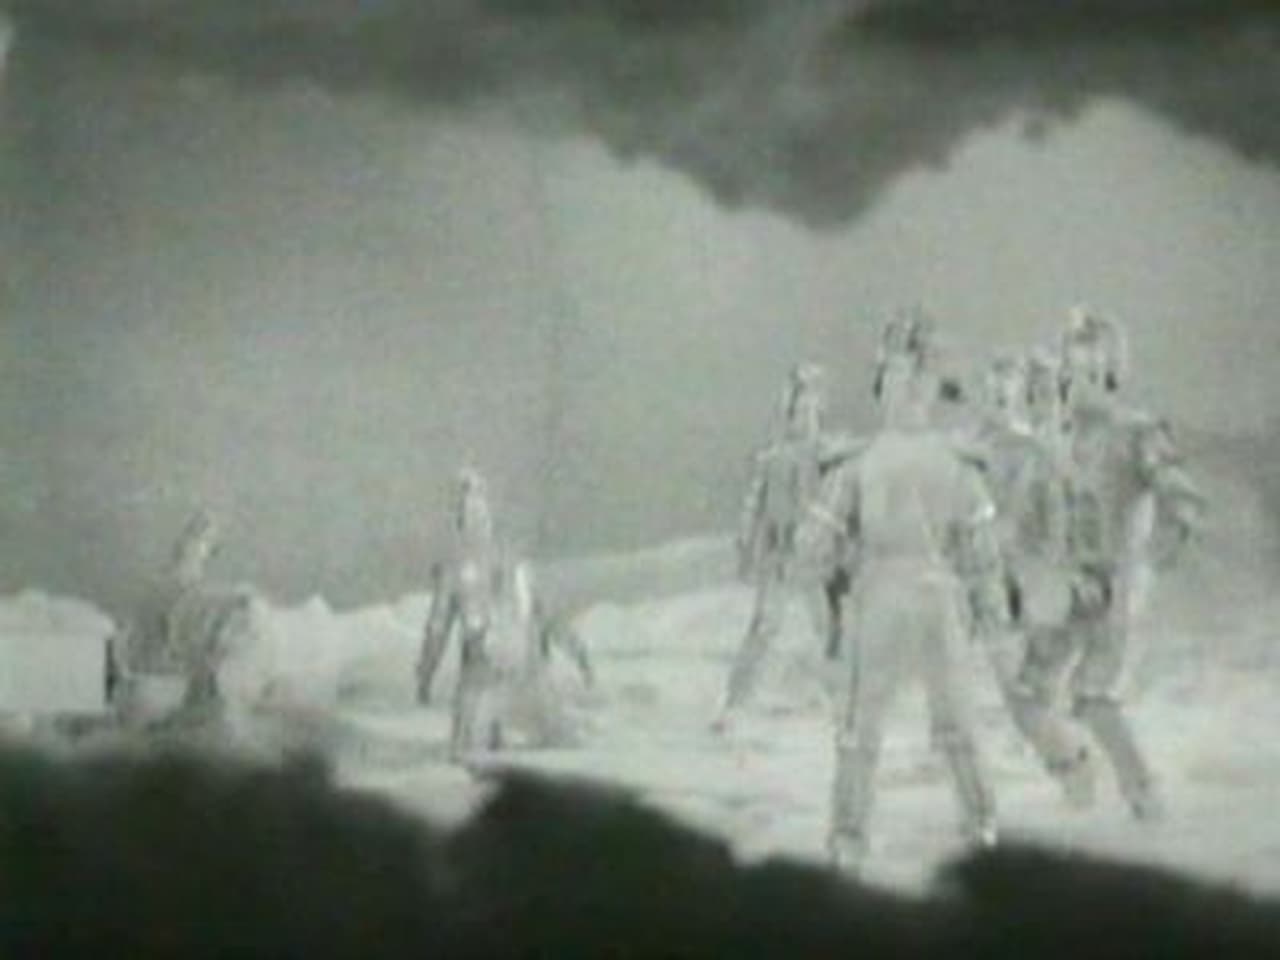 Doctor Who - Season 4 Episode 7 : The Tenth Planet (3)